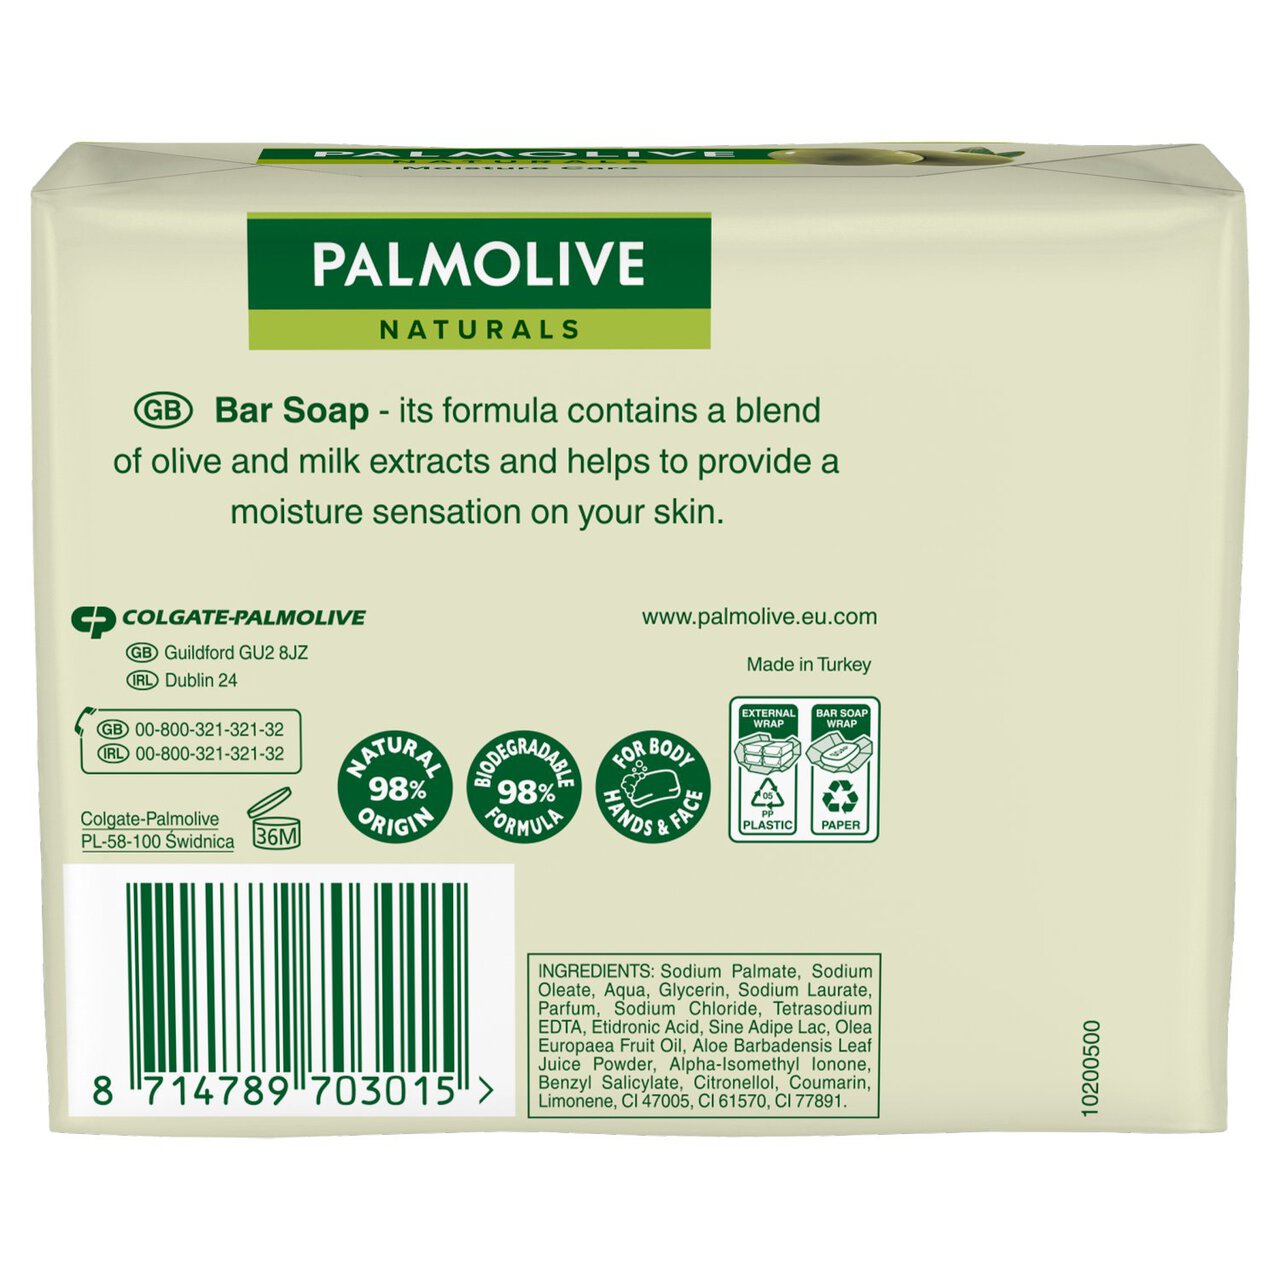 Palmolive Naturals Moisture with Olive Soap Bar 4 Pack 4 x 90g